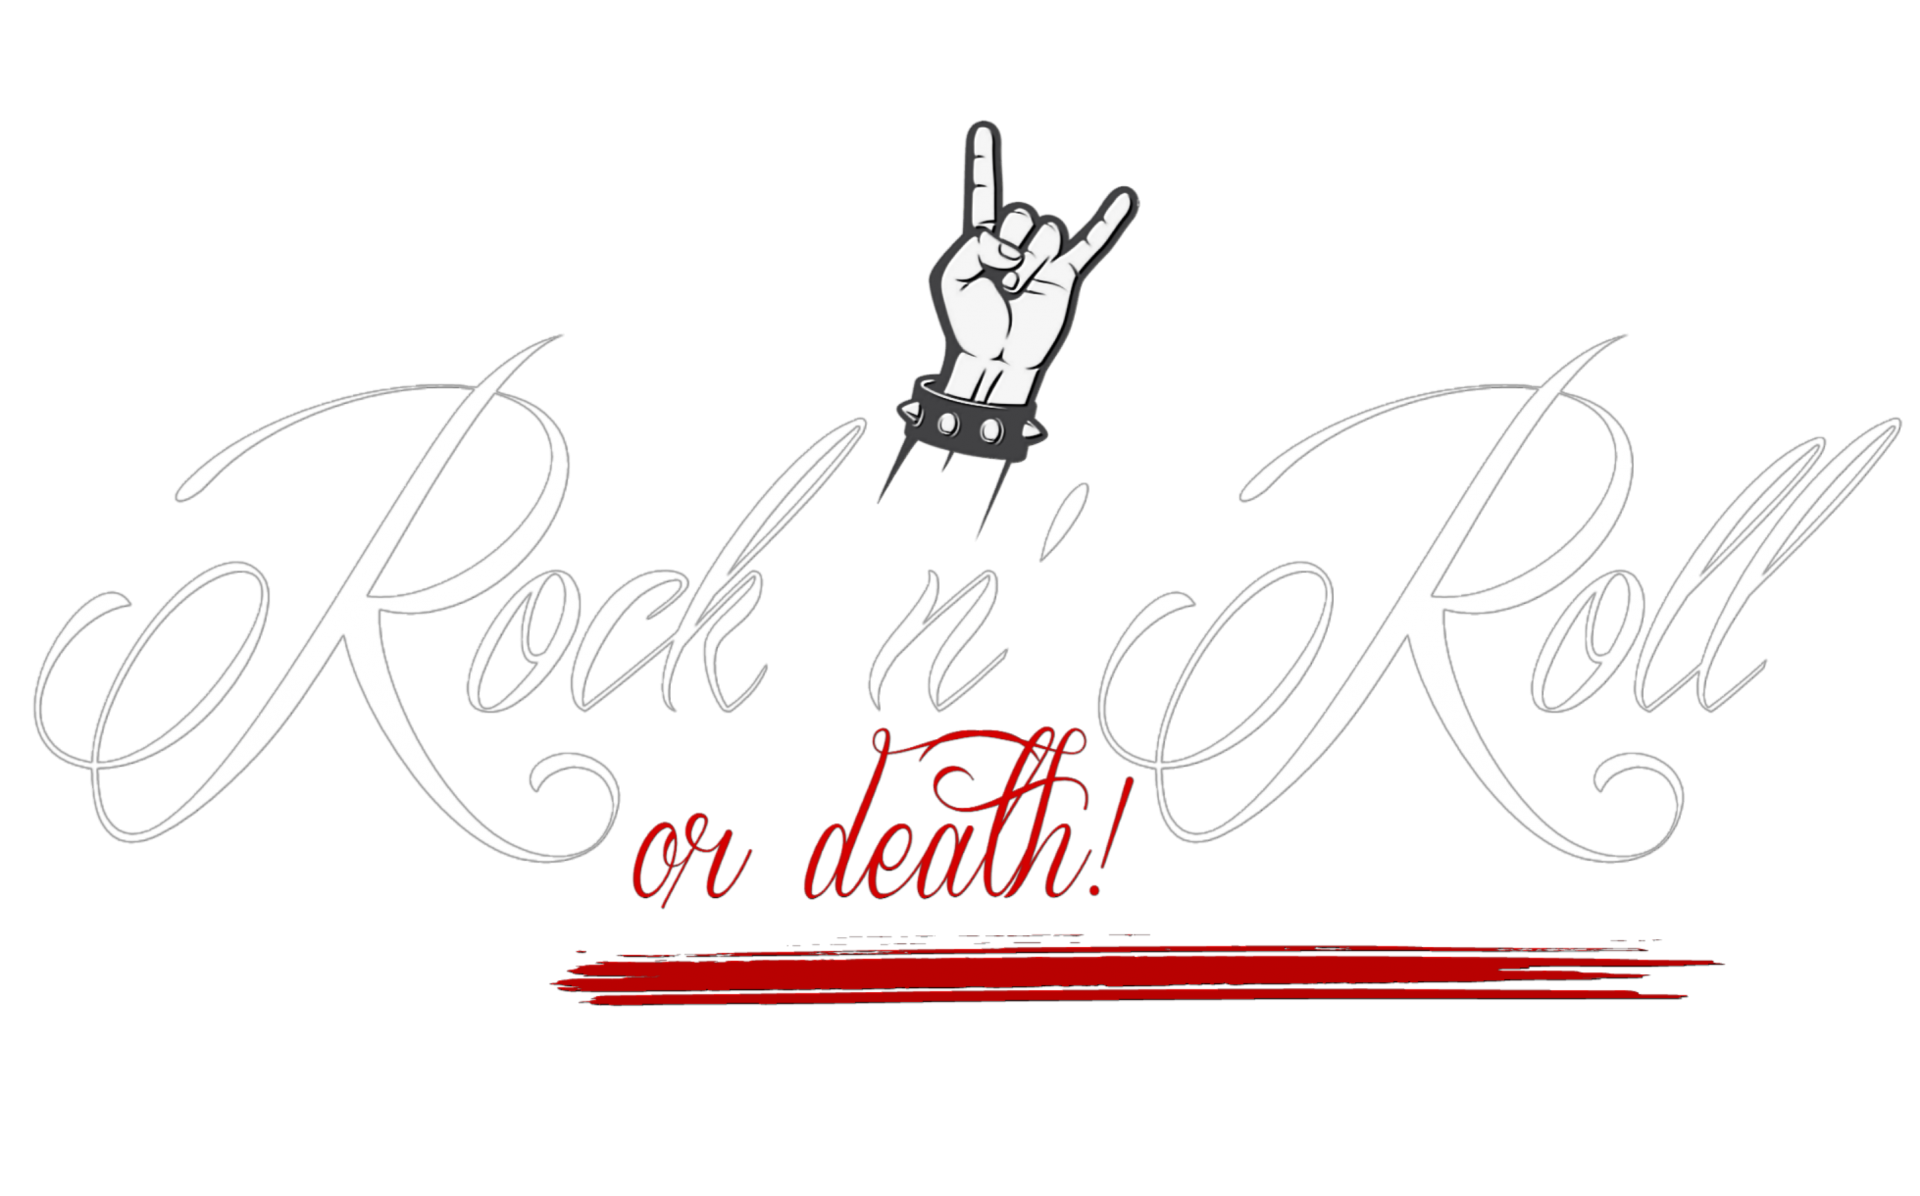 rock-n-roll-or-death-free-stock-photo-public-domain-pictures